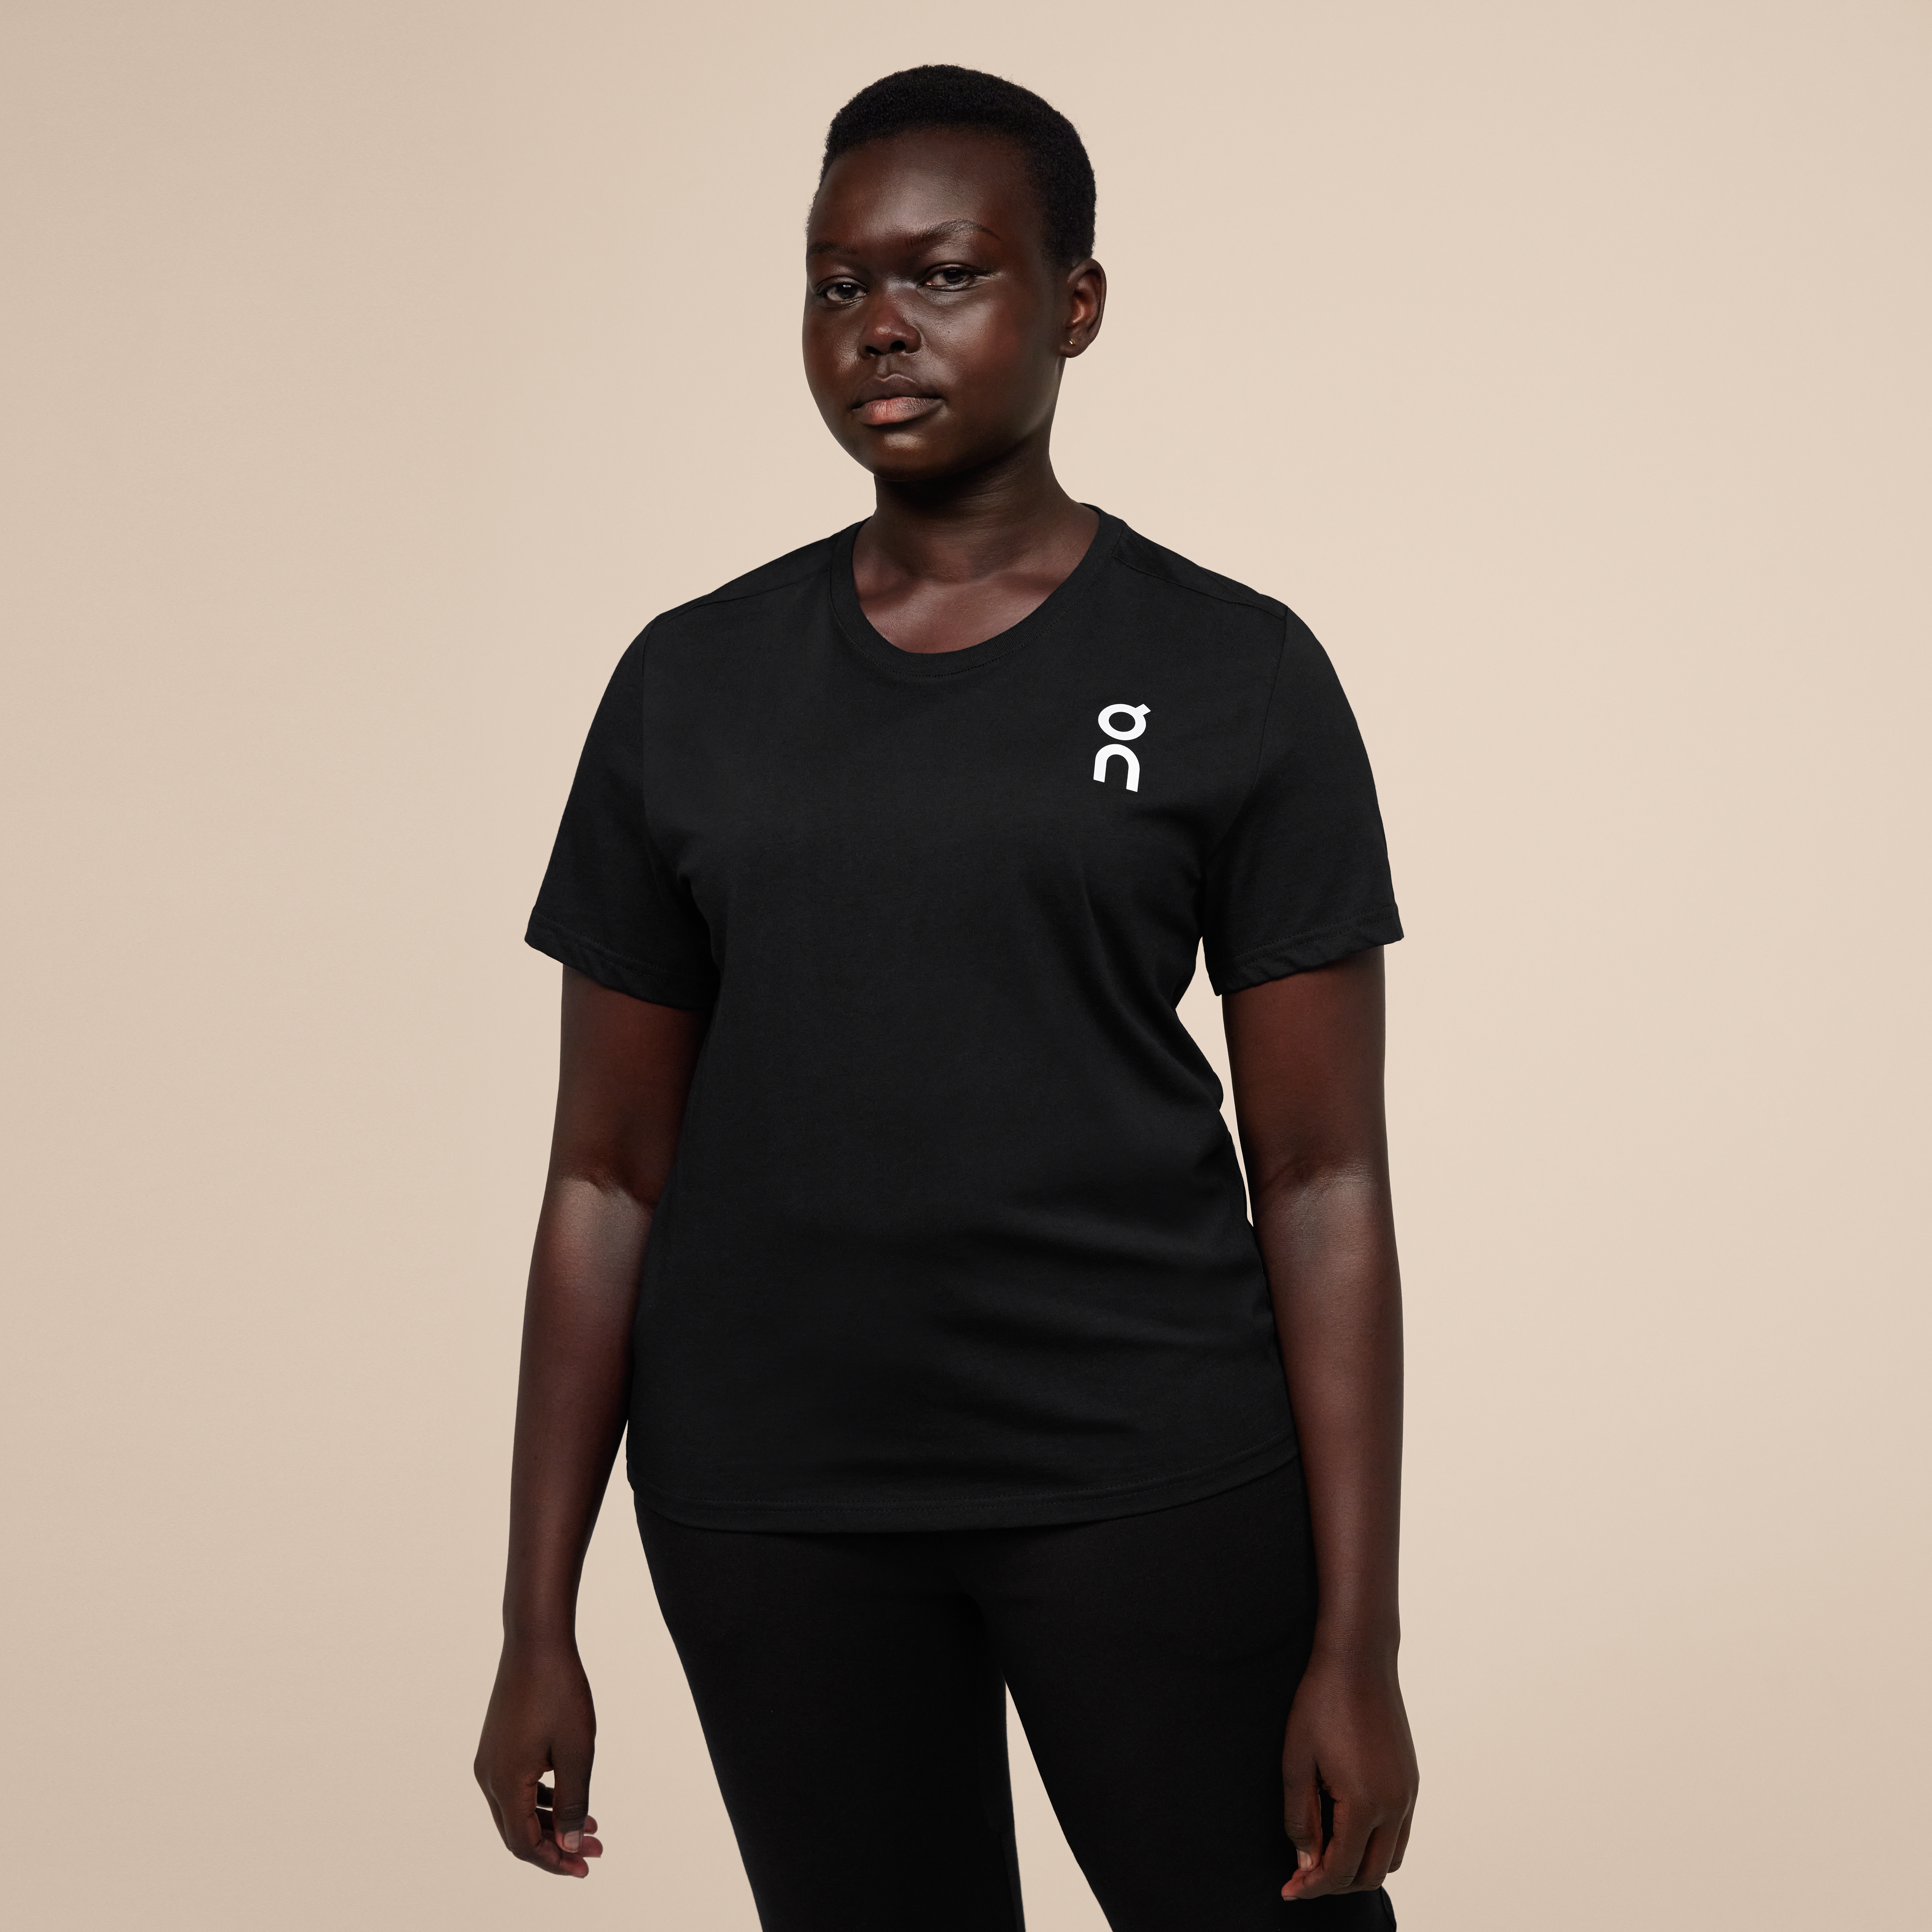 On Graphic-T Black Women All-day, recovery, organic cotton Tops and t-shirts